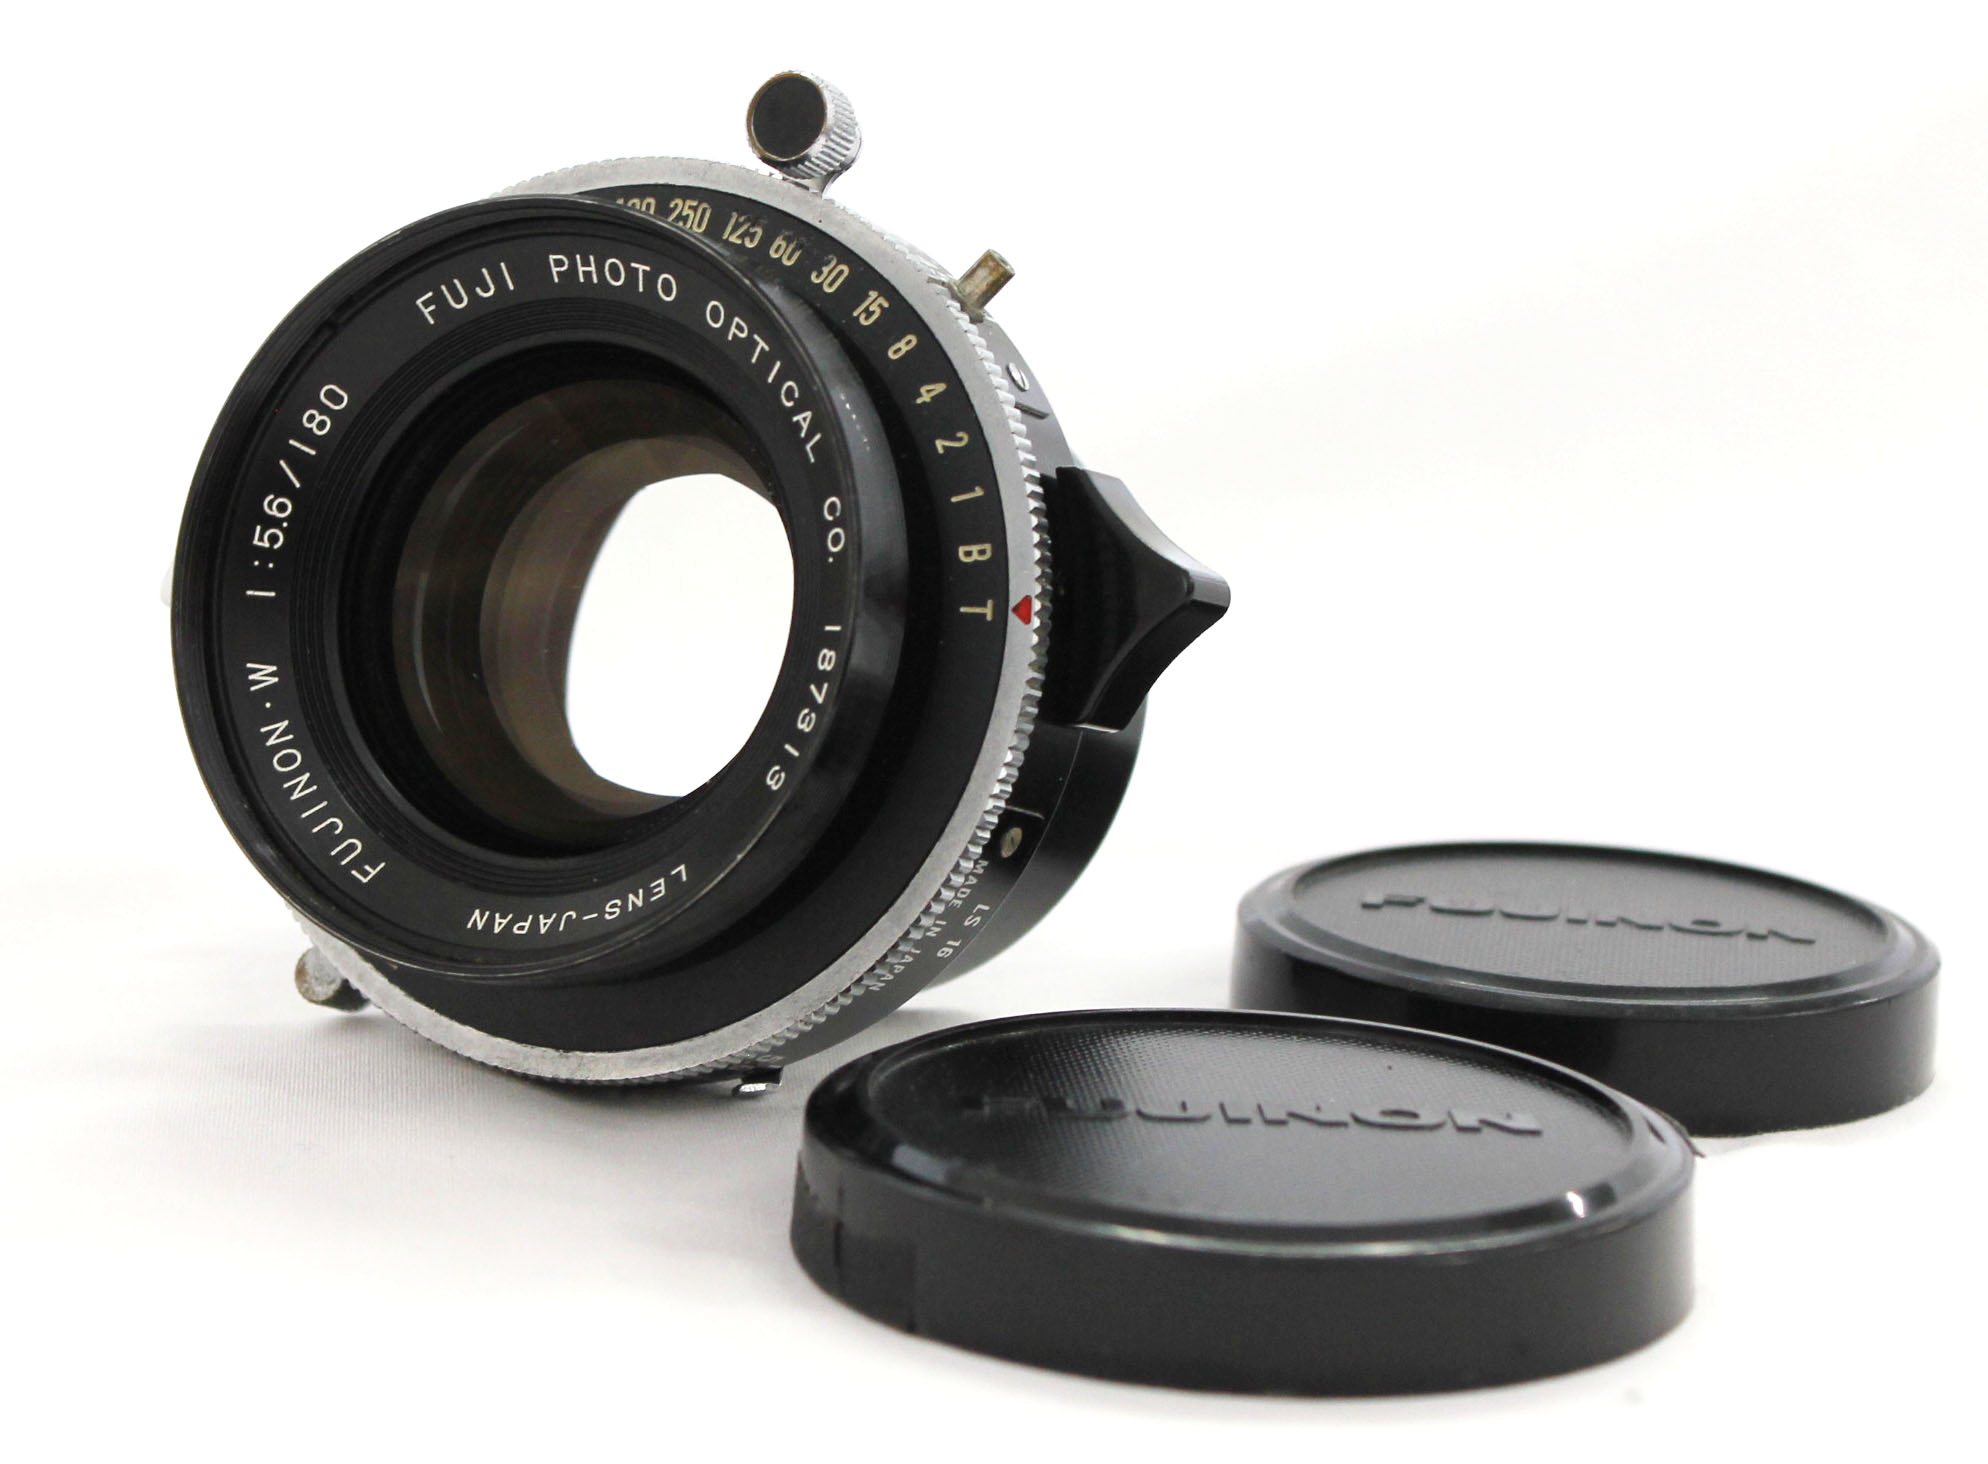 Japan Used Camera Shop | Fuji Fujinon W 180mm F/5.6 4x5 Large Format Lens with Copal Shutter from Japan